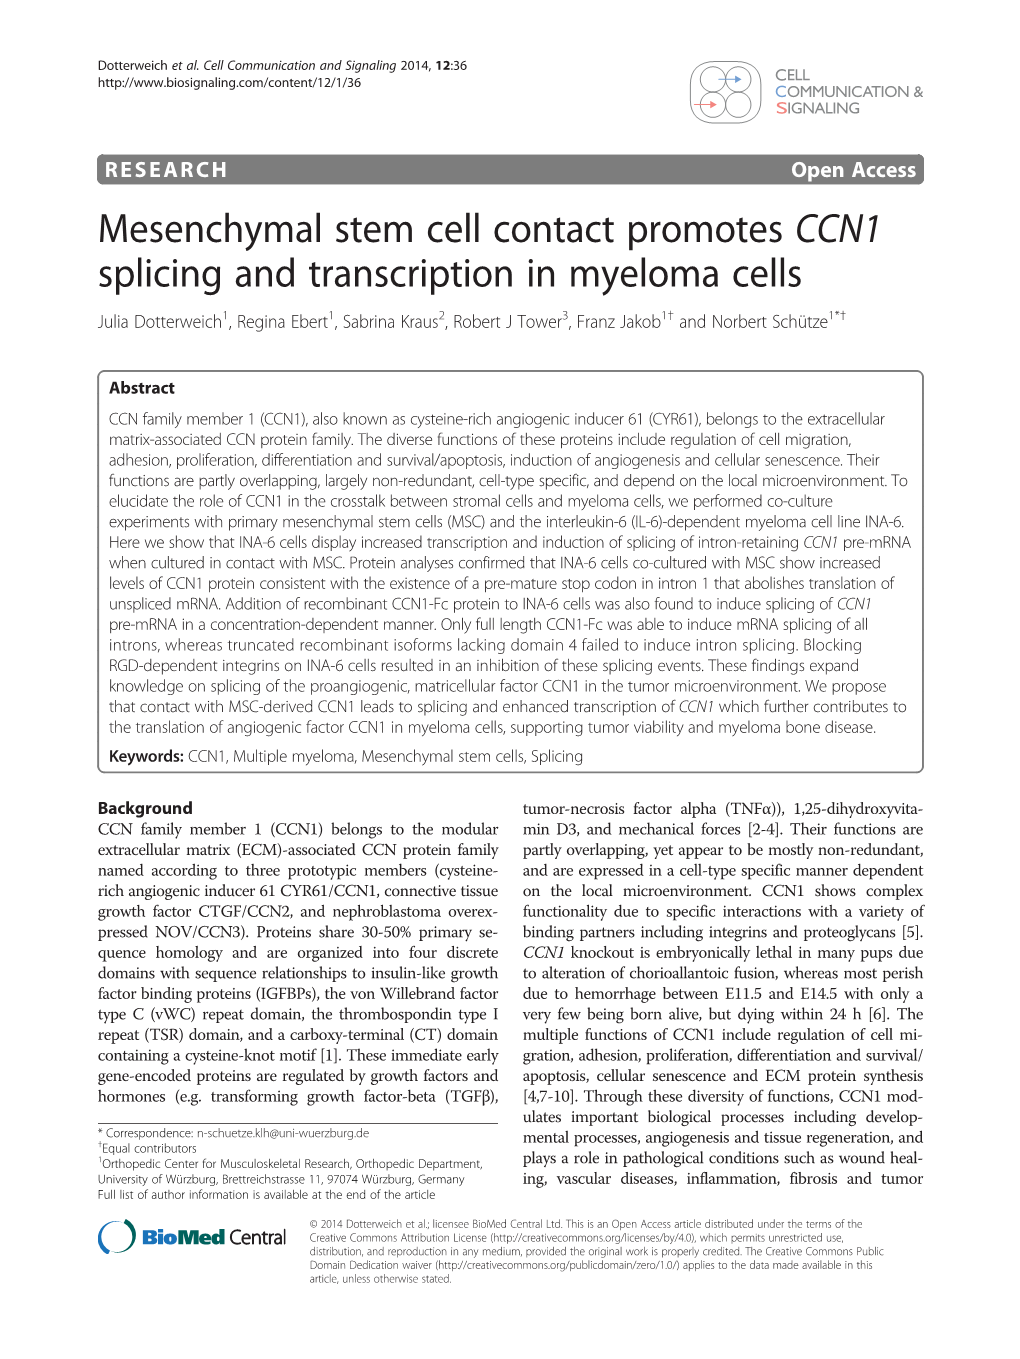 Mesenchymal Stem Cell Contact Promotes CCN1 Splicing And